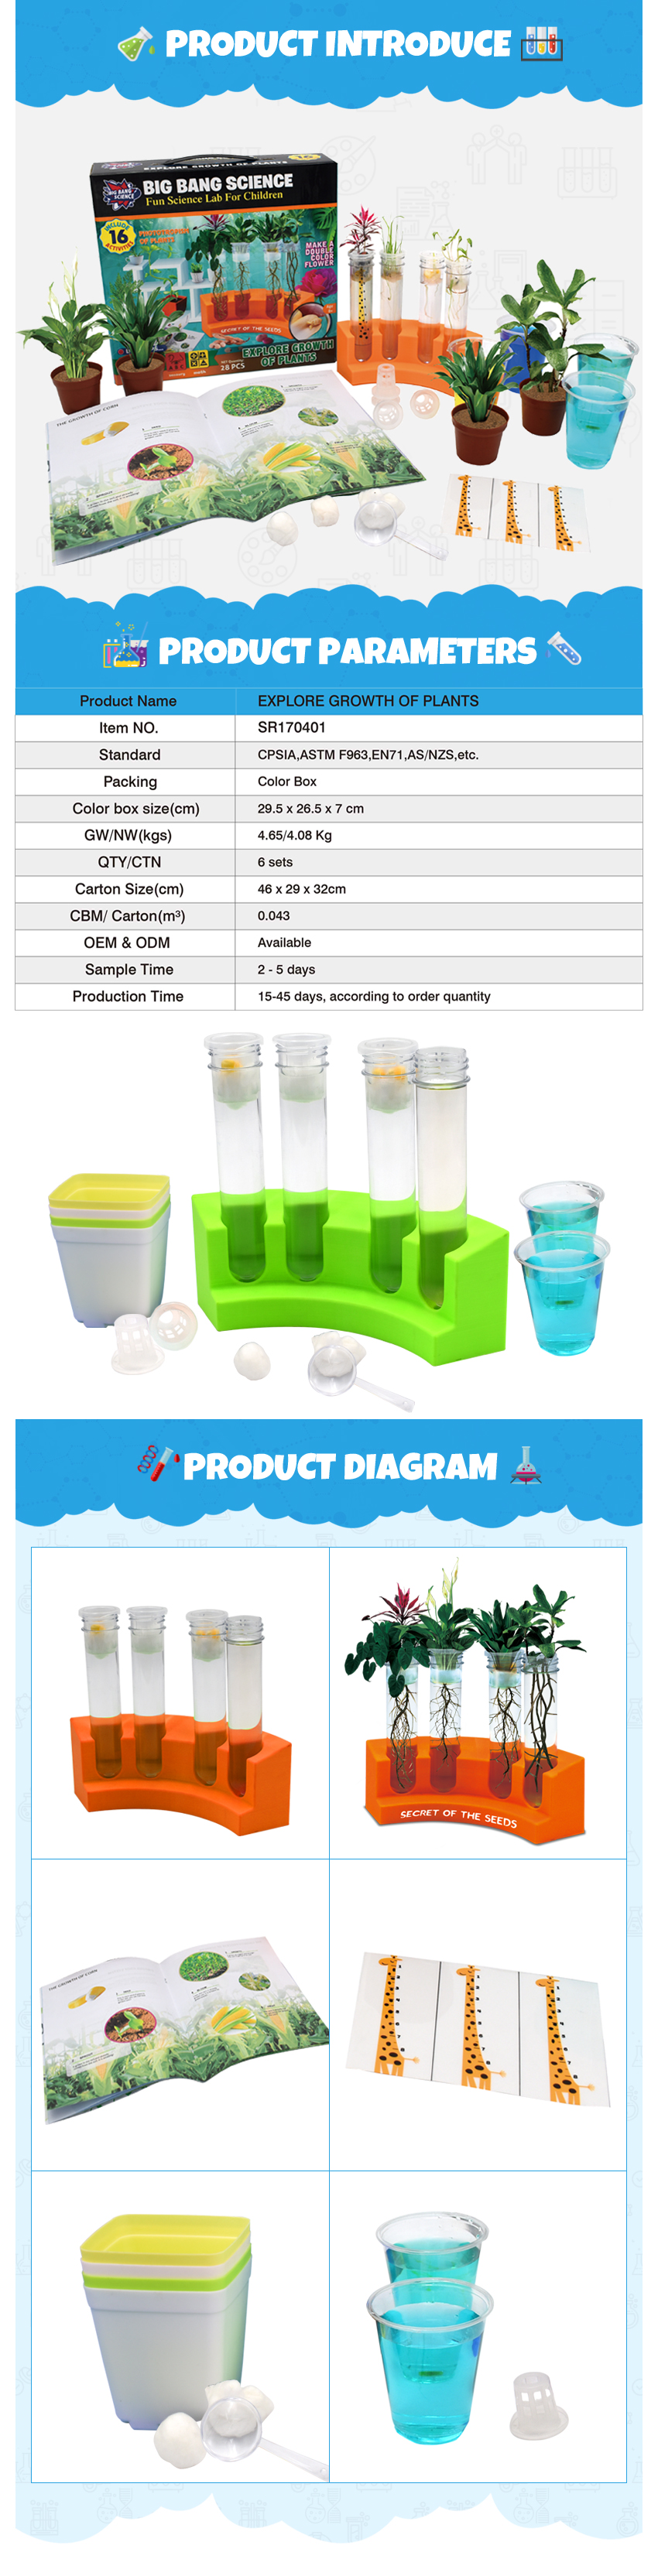 Explore growth of plants .Product details